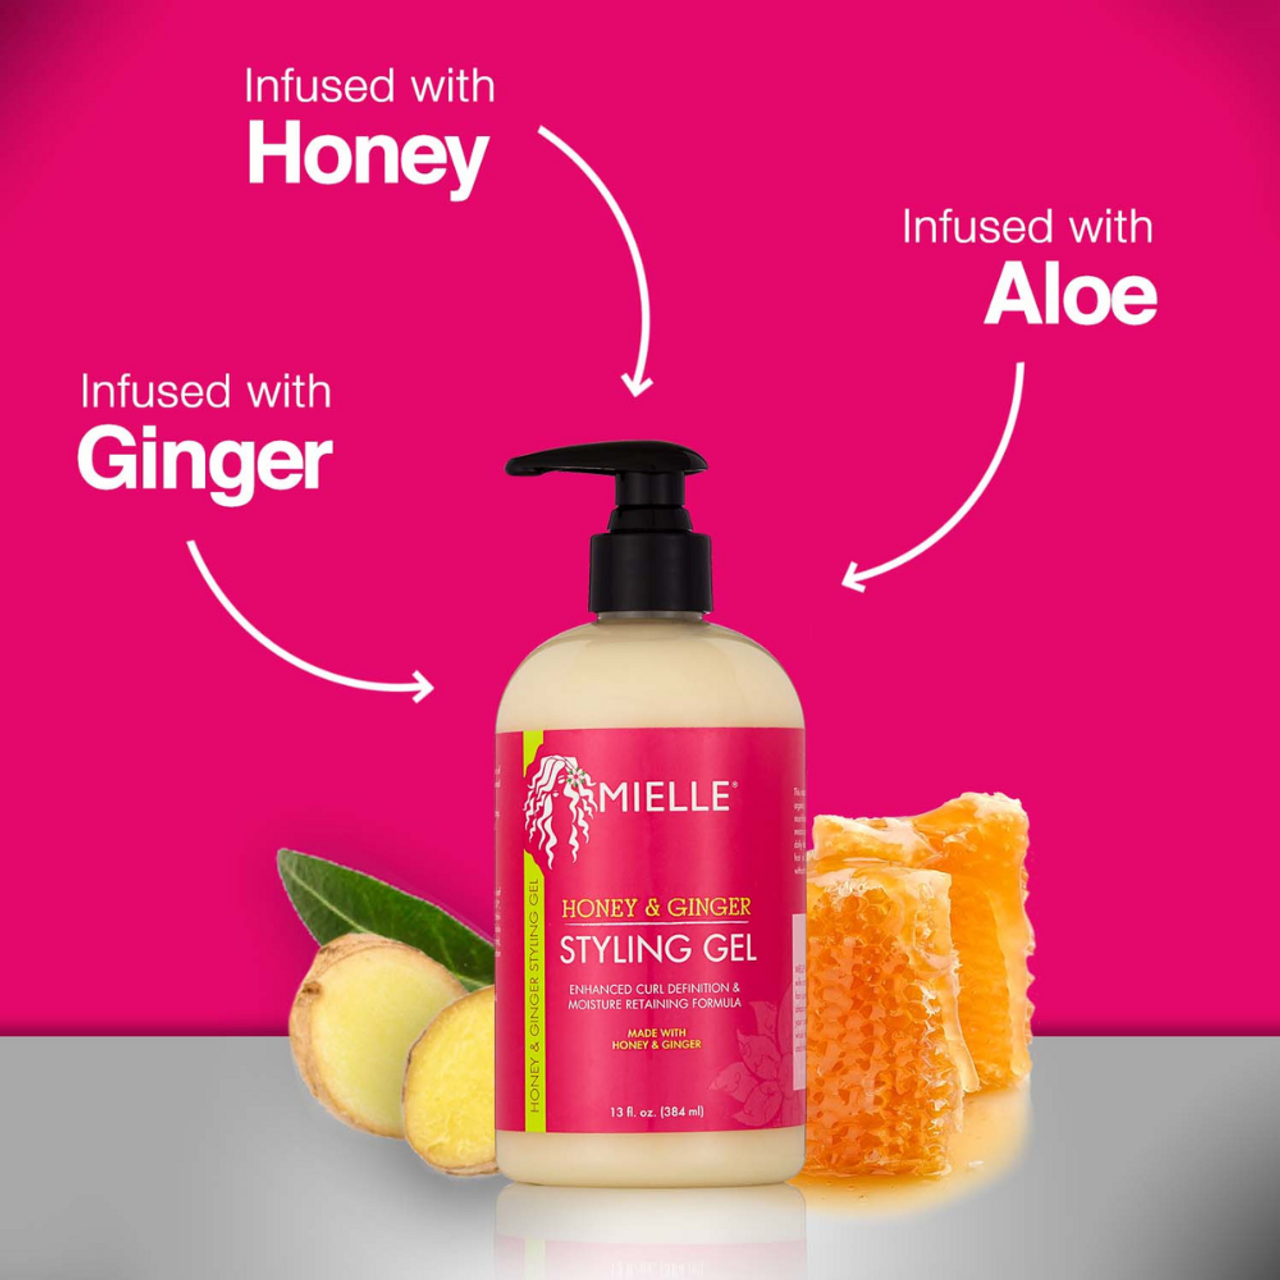 https://cdn11.bigcommerce.com/s-ah05h/images/stencil/1280x1280/products/7025/16799/honey_ginger_styling_gel_ingredients_5000x__23079.1667396572.png?c=2?imbypass=on